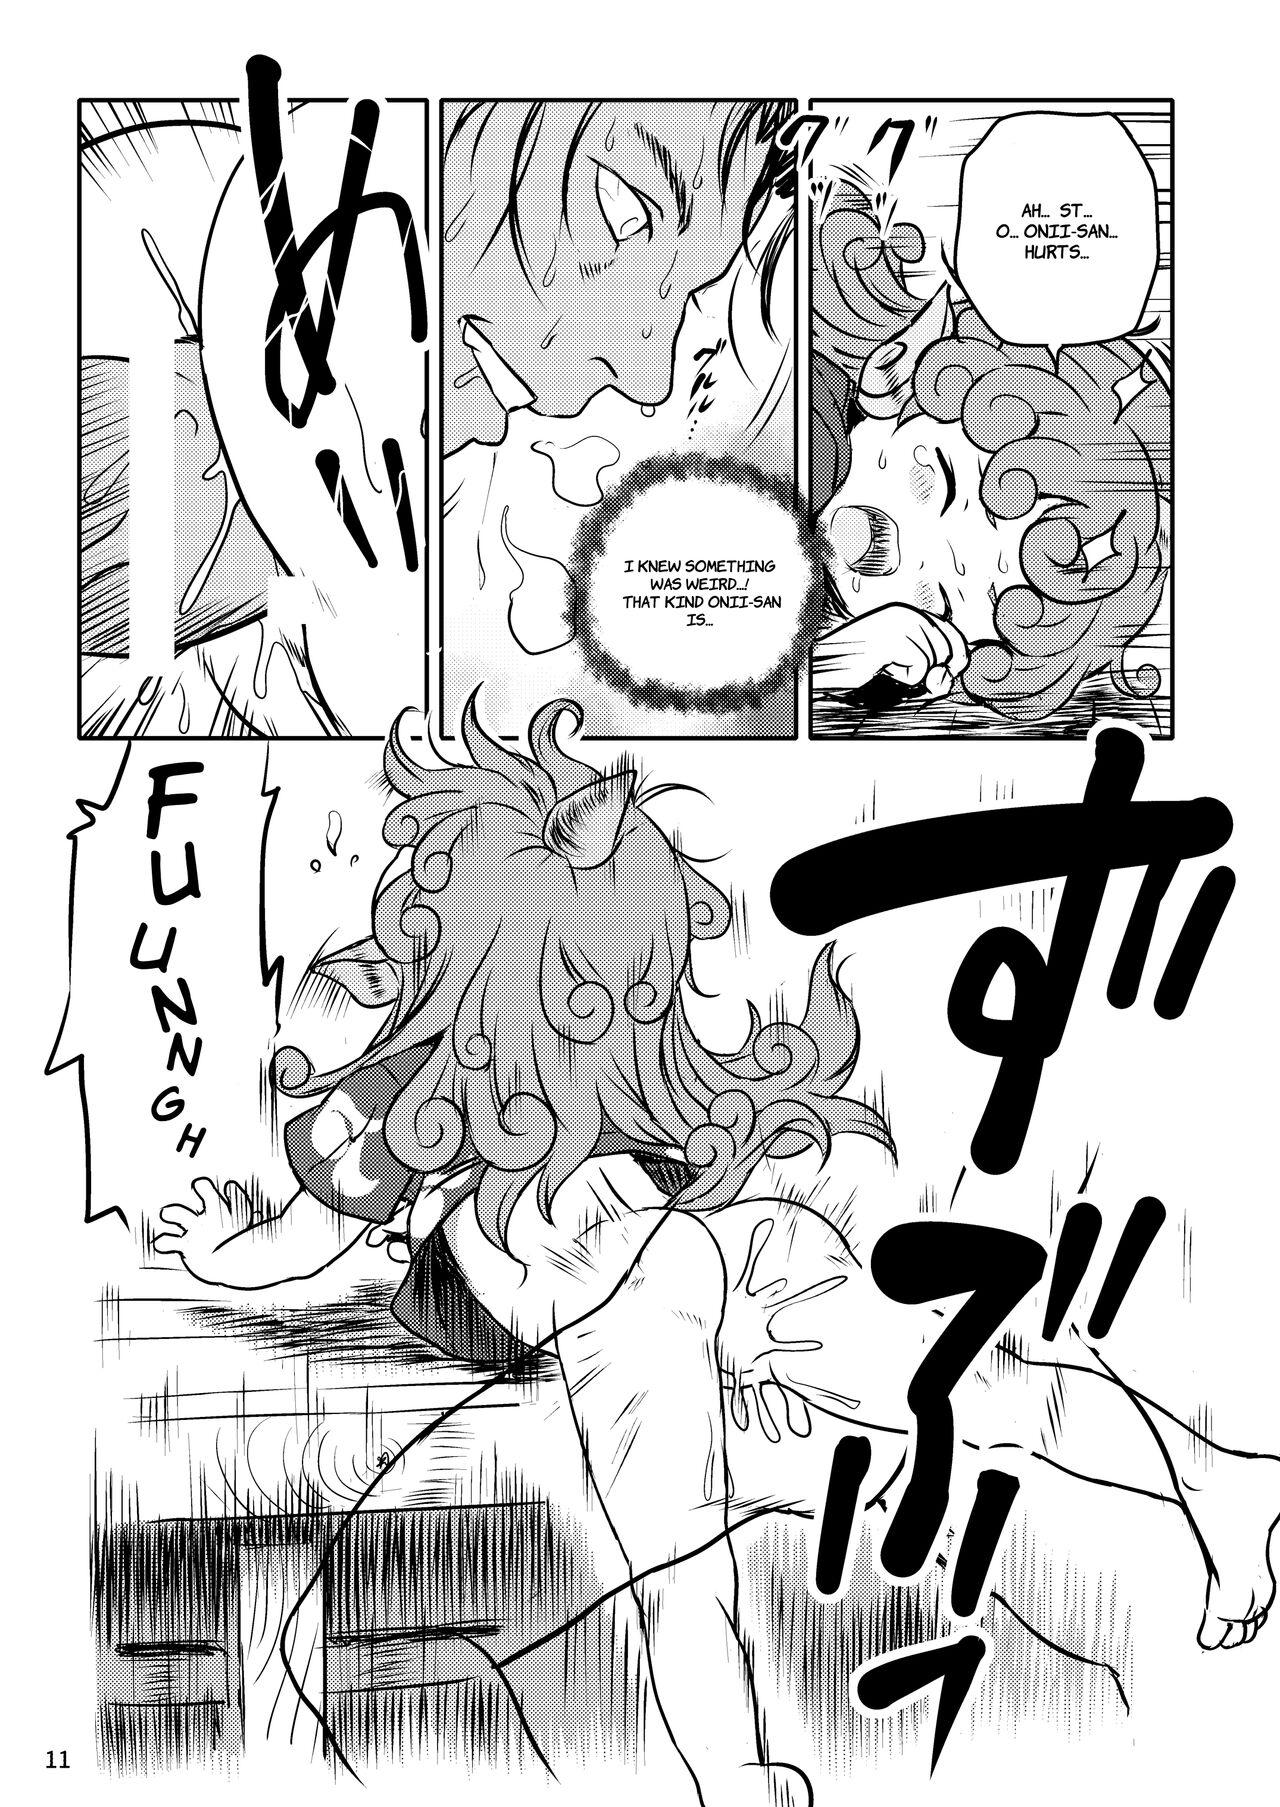 Tit Haratte! Aun-chan! - Touhou project Leaked - Page 11